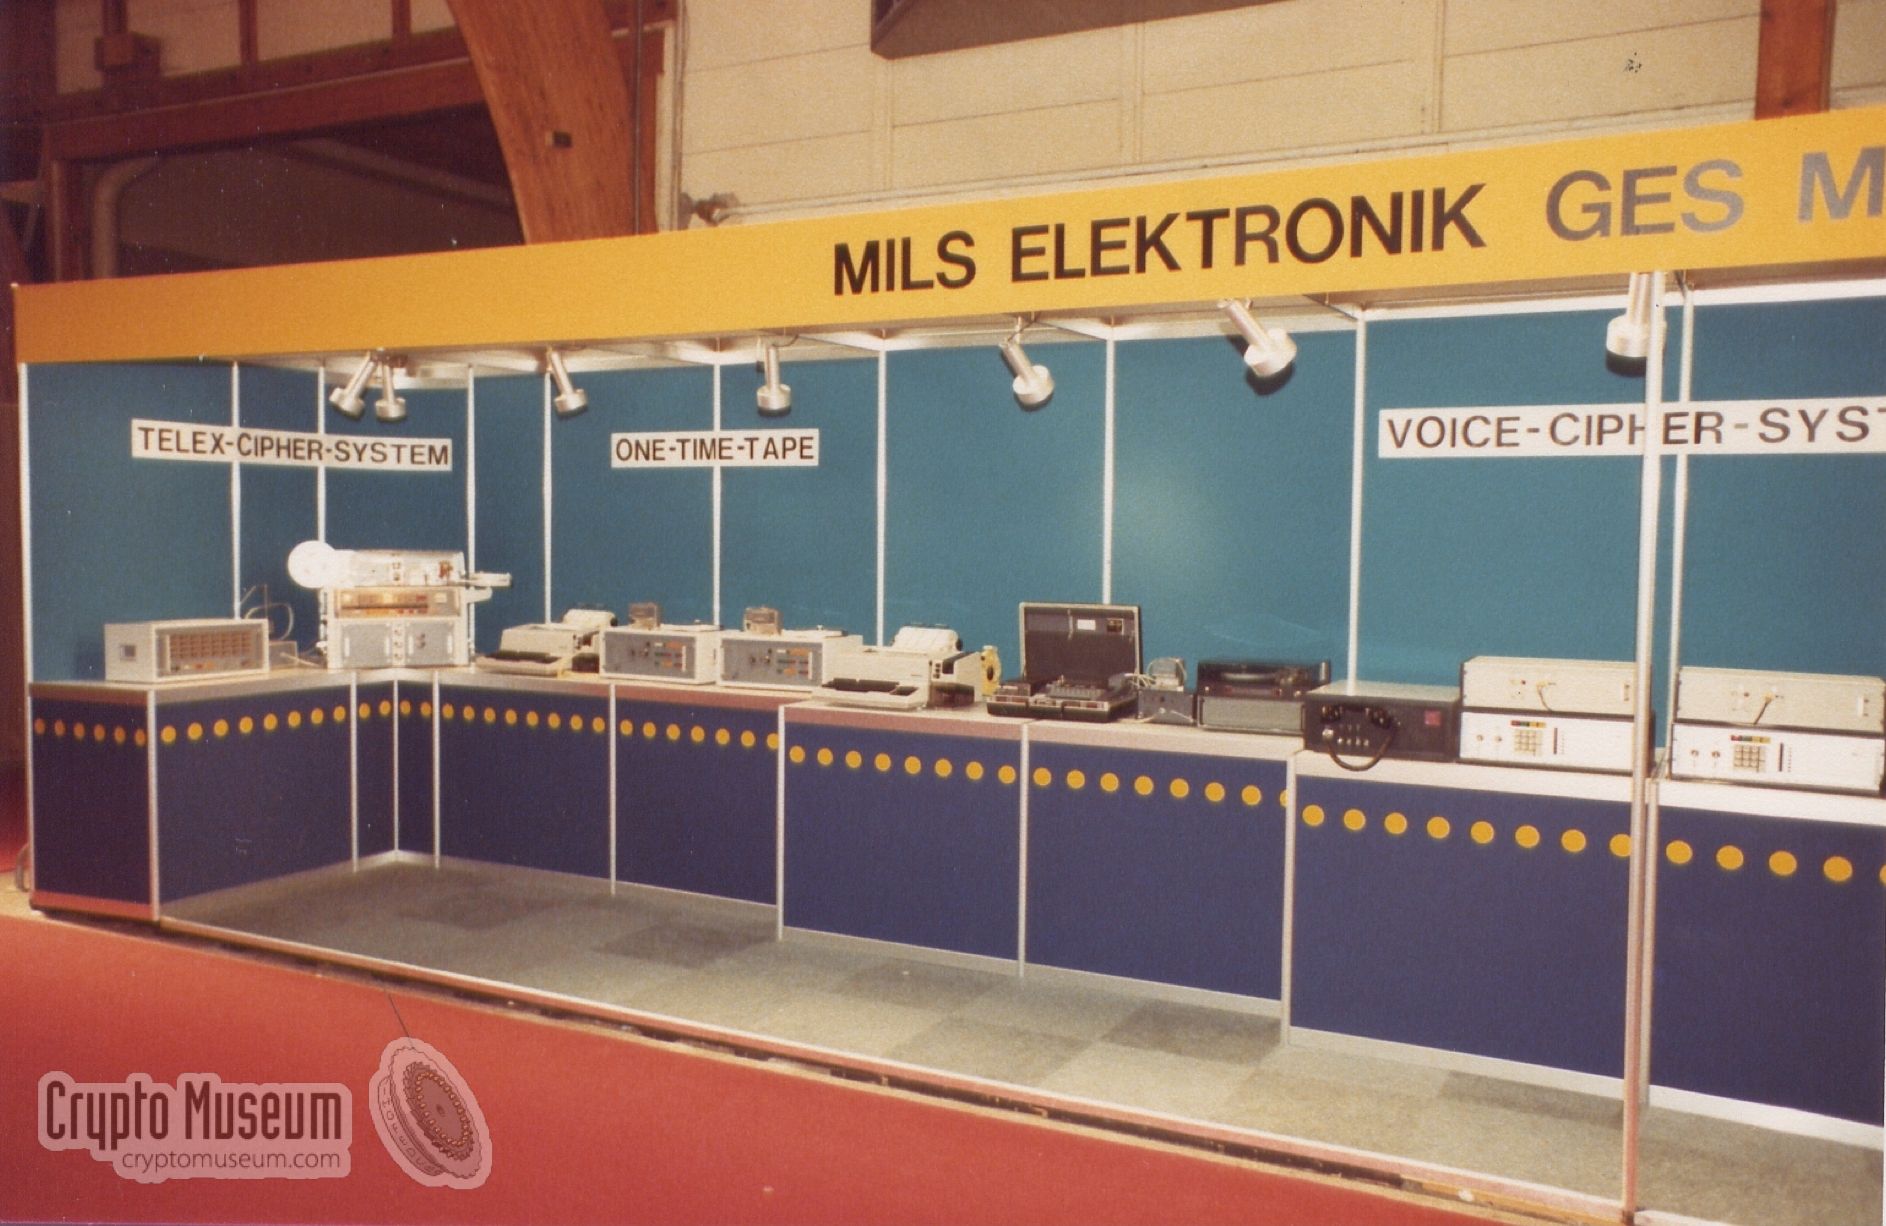 The Mils Elektronik stand at the Telecom conference in Geneva in 1979. Photograph by Eberhard Scholz [1].